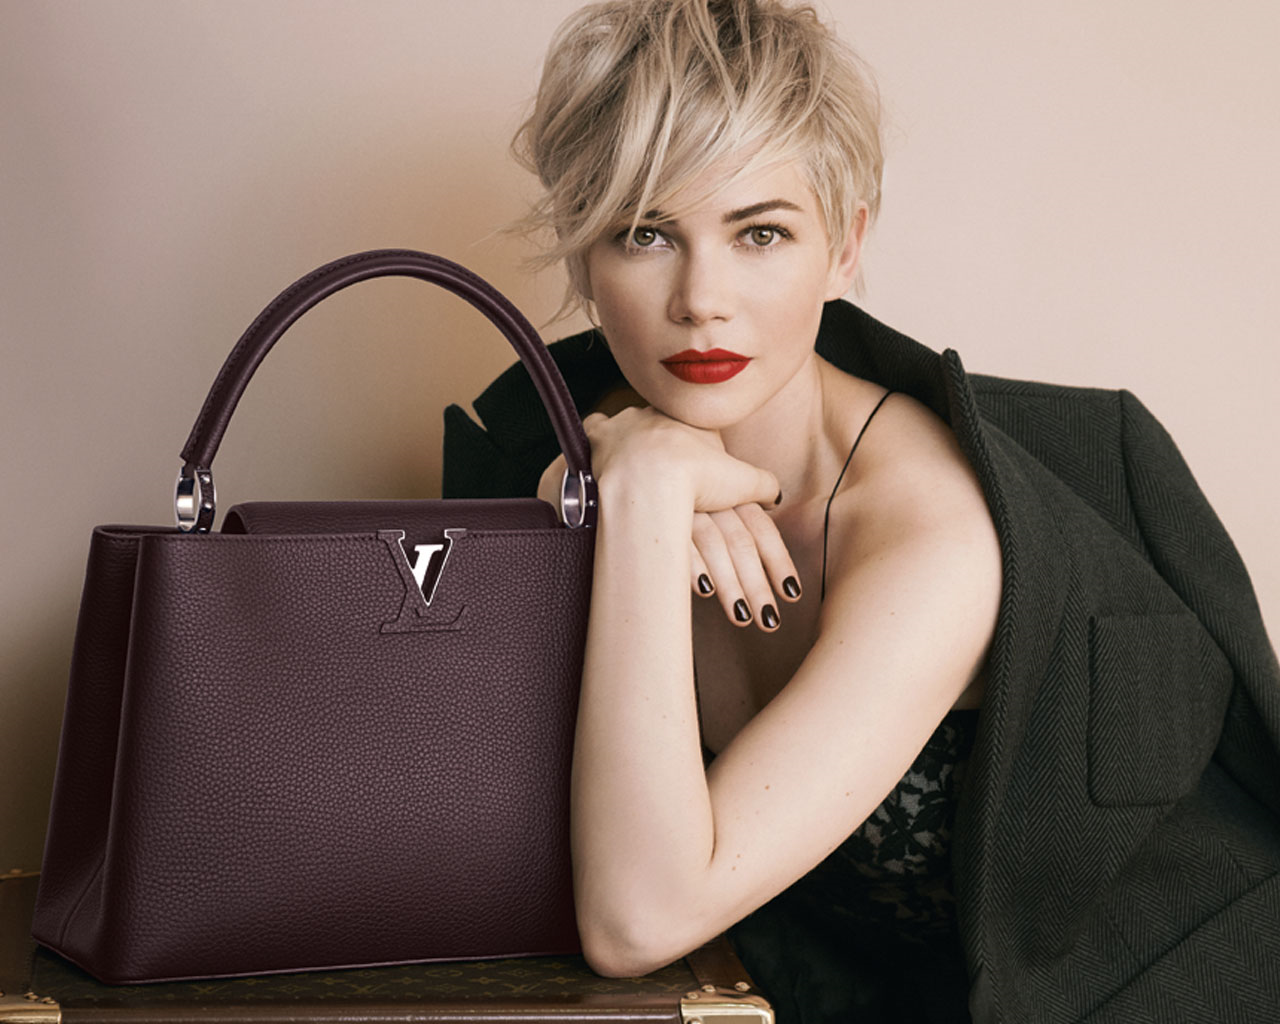 LOUIS VUITTON MOST ICONIC HANDBAGS and the celebrities who wear them 